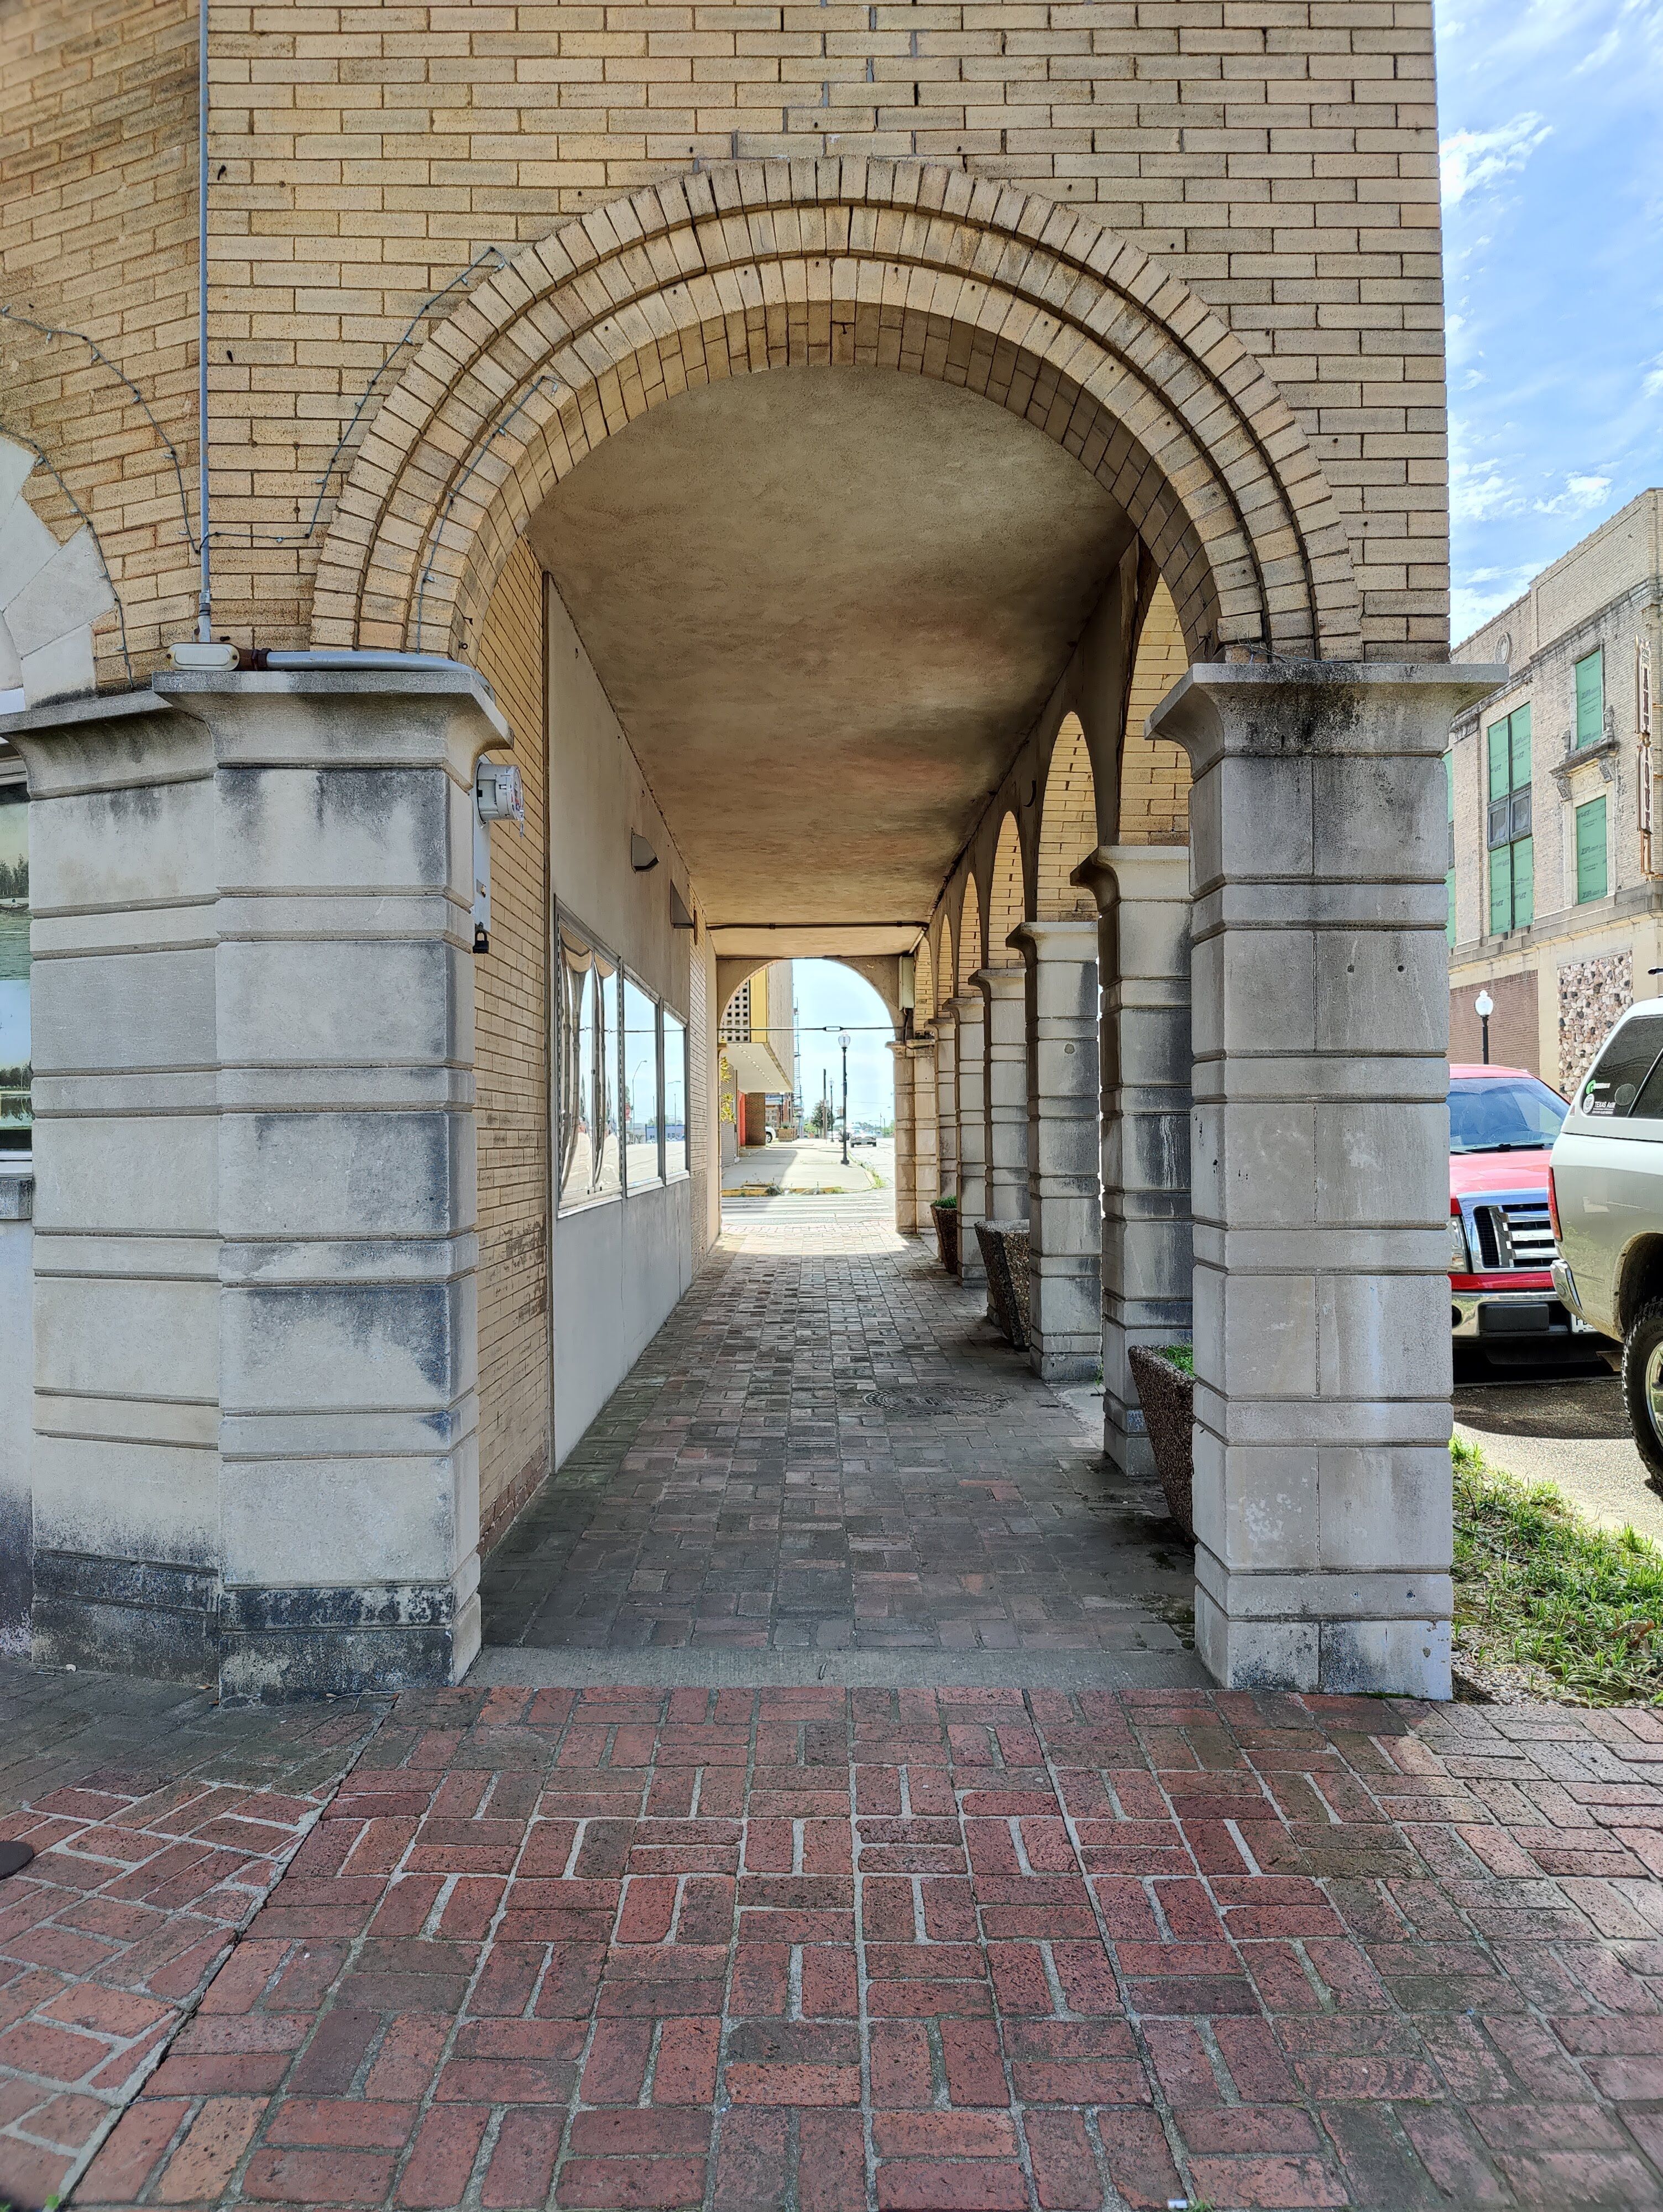 OnePlus 9 Pro Camera Sample: An archway on a walking path shot with the main camera